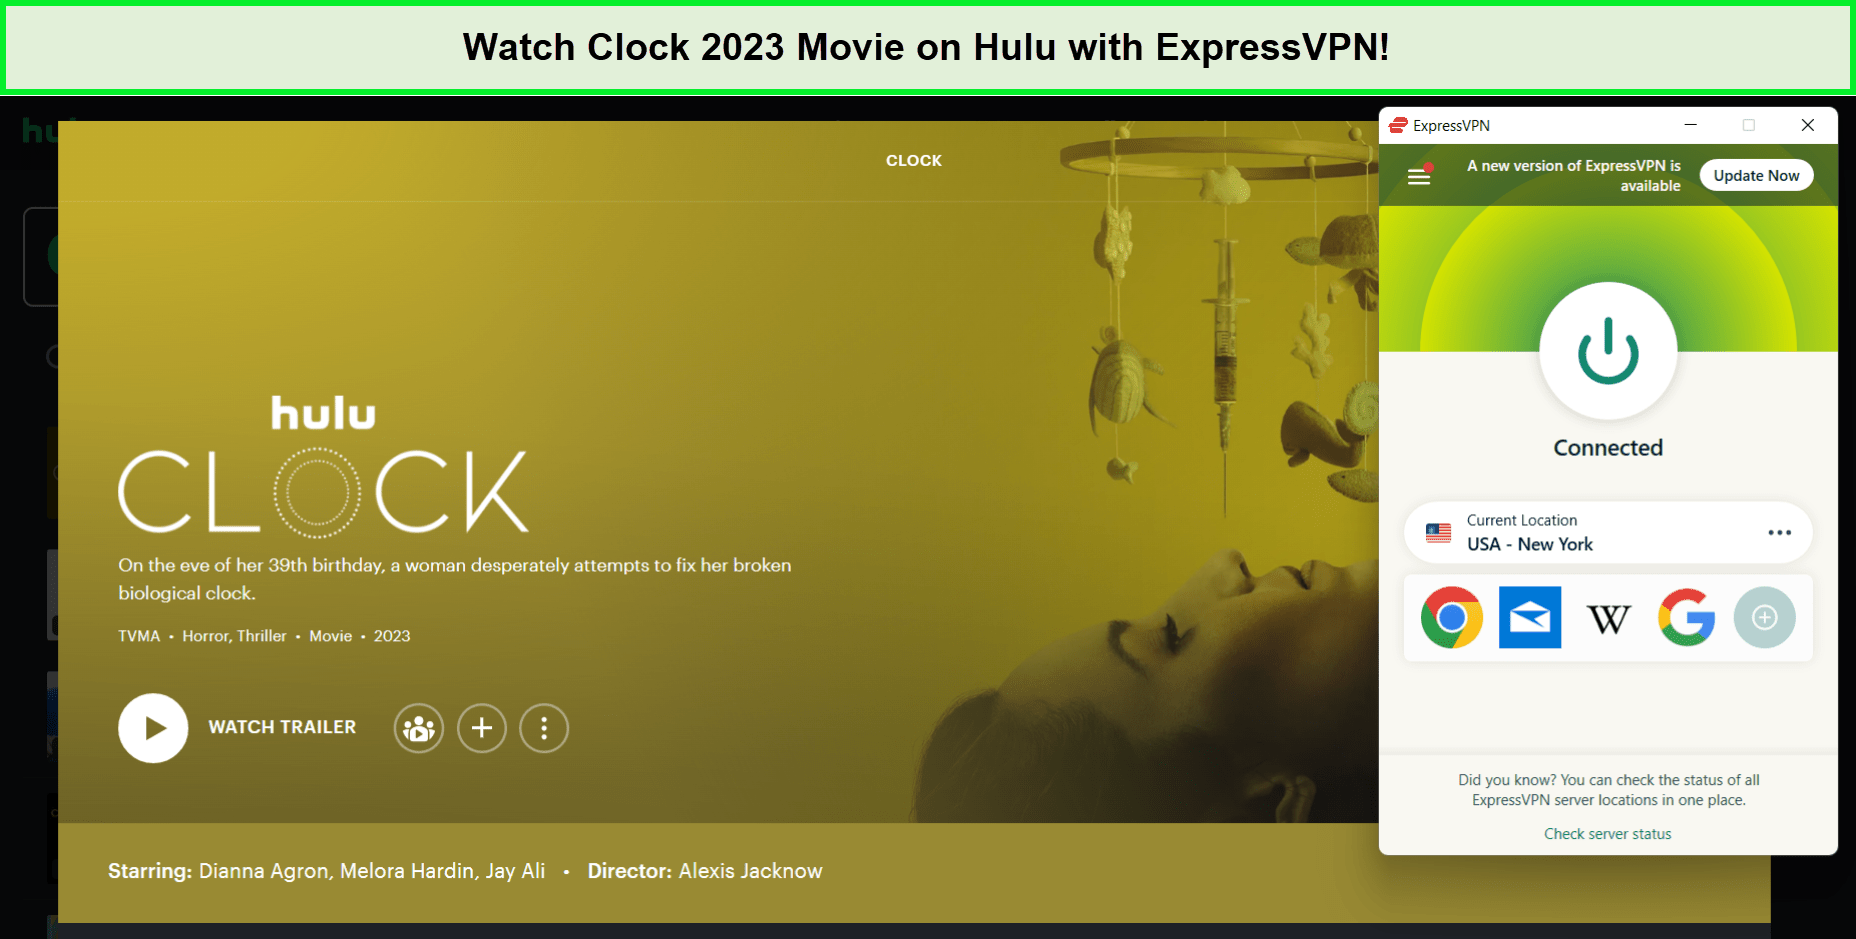 With-ExpressVPN-Watch-Clock-2023-Movie-on-Hulu-in-Hong Kong